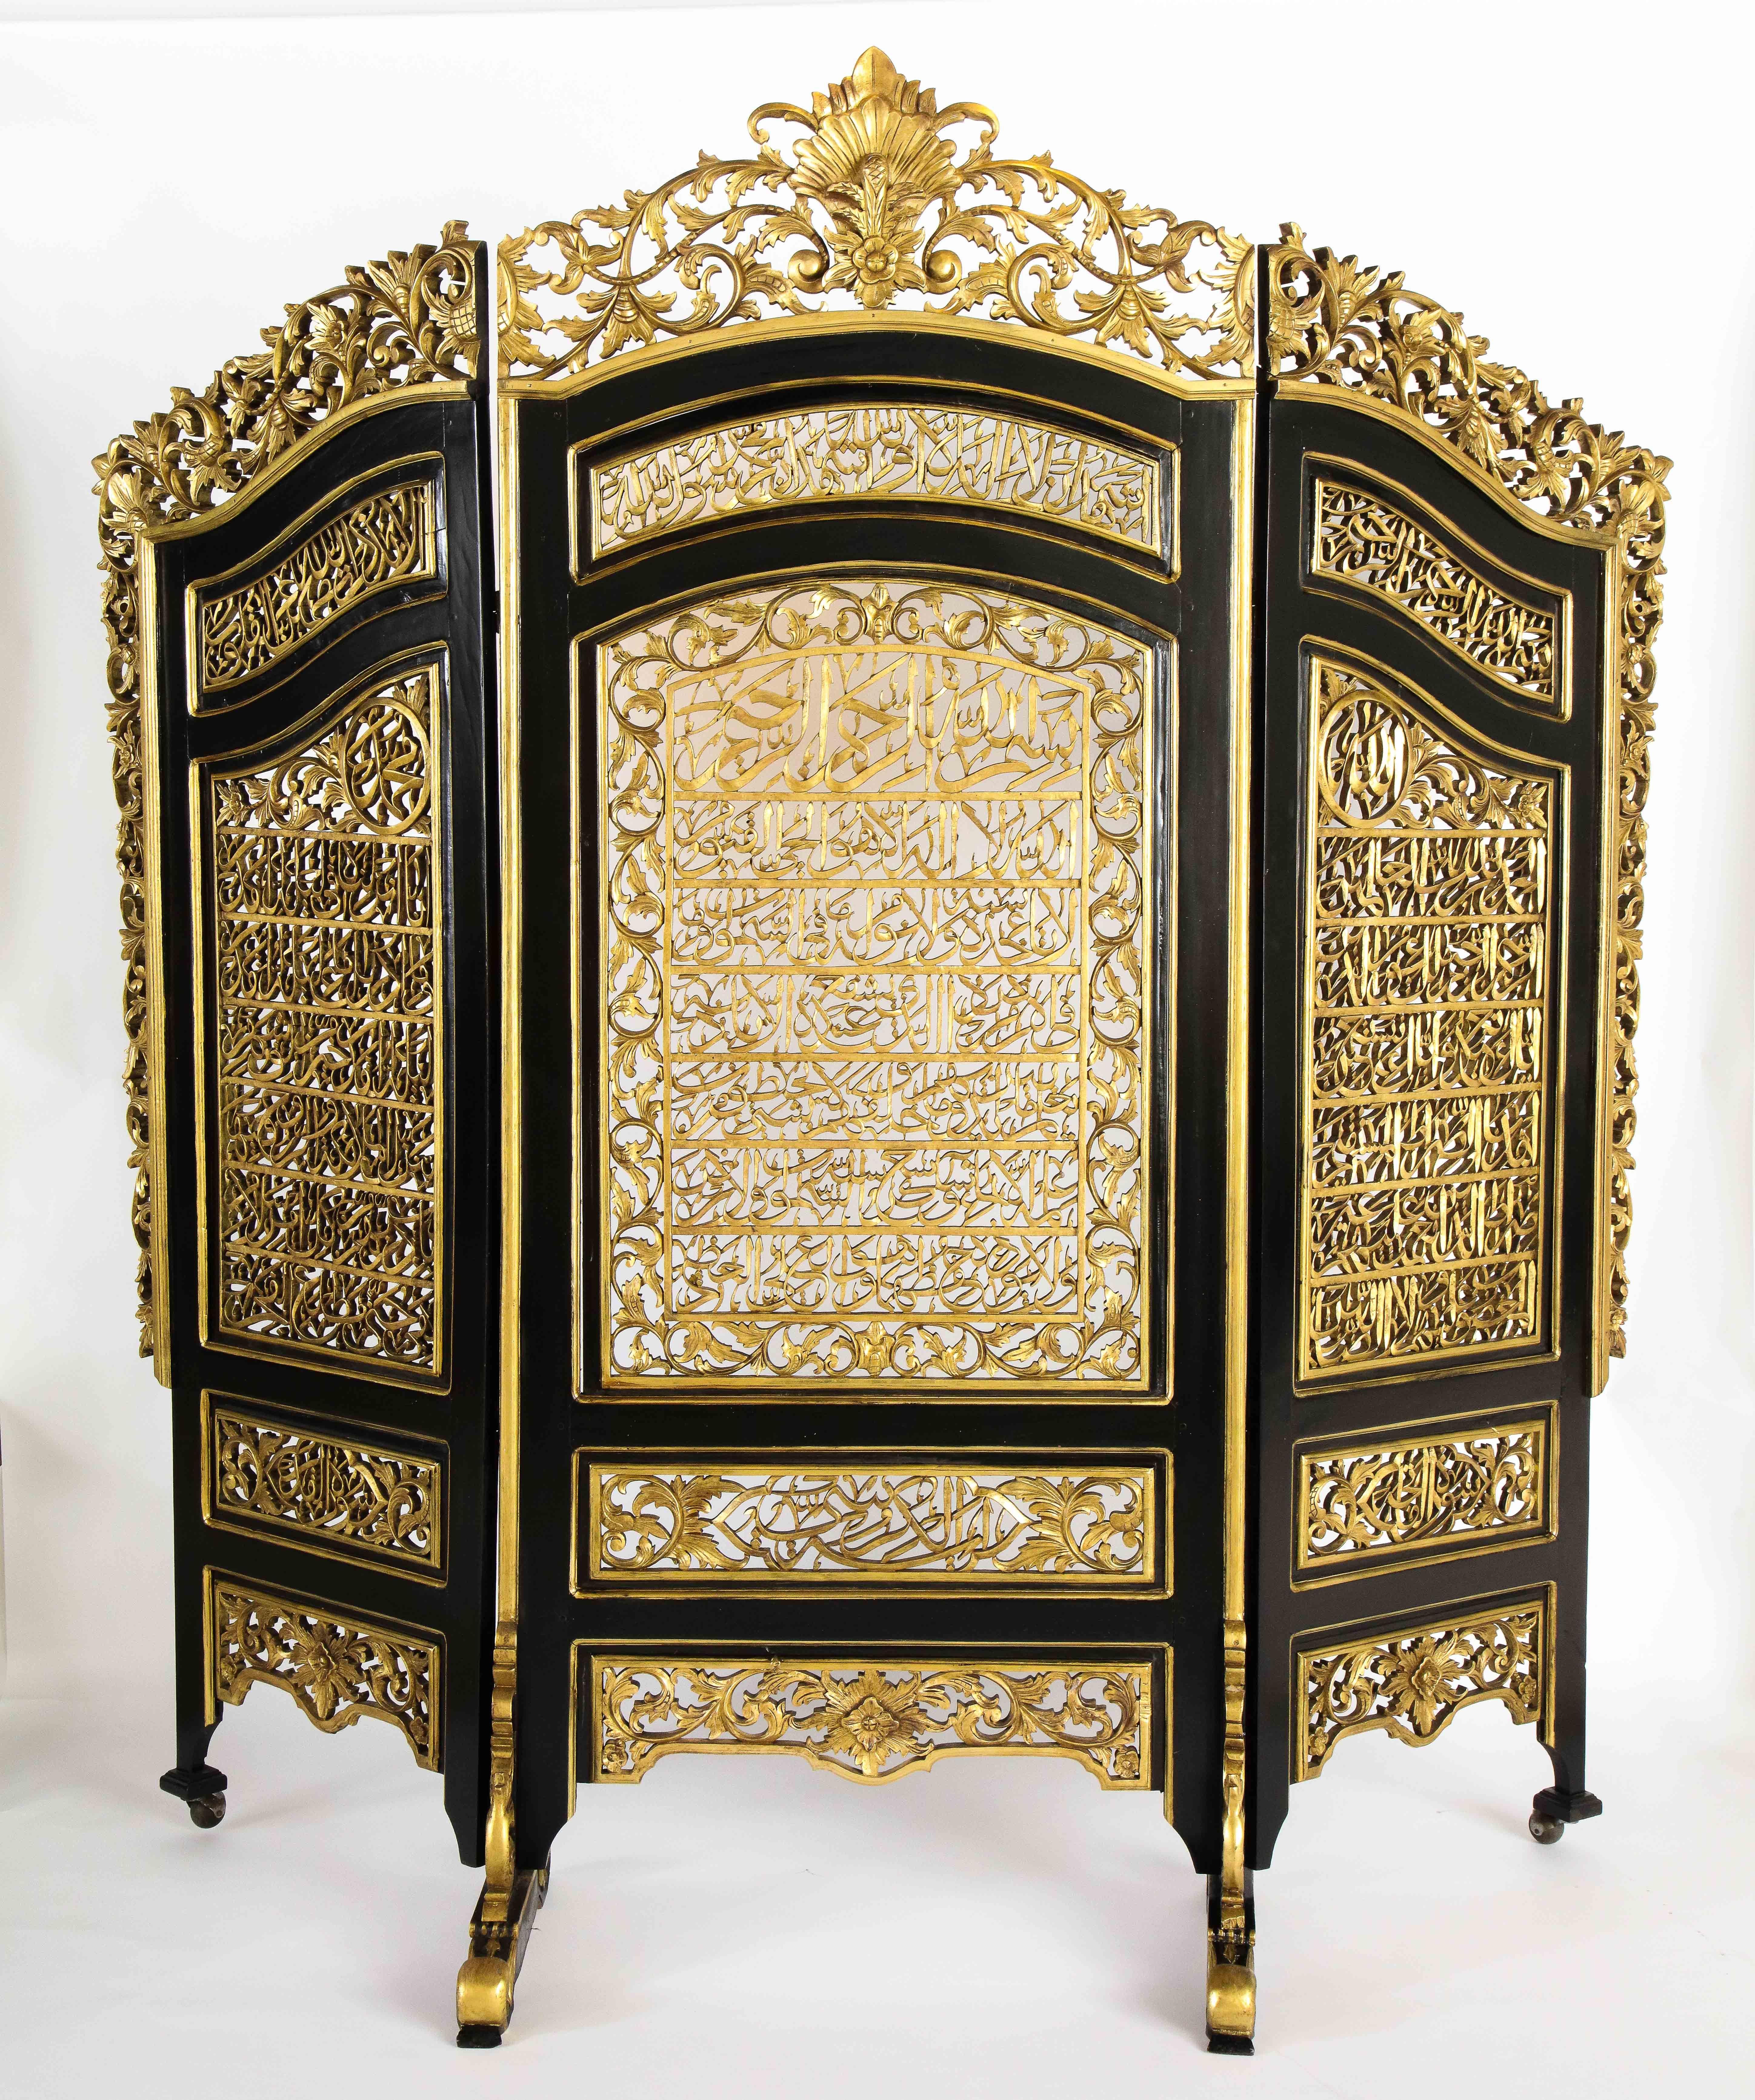 A rare, masterful, and exceptional Islamic gilt and ebonized wood three-panel screen, circa 1900.

Hand carved by a master Arabic Islamic calligrapher, this screen will make a very powerful statement in any room placed. If you are Muslim, or enjoy